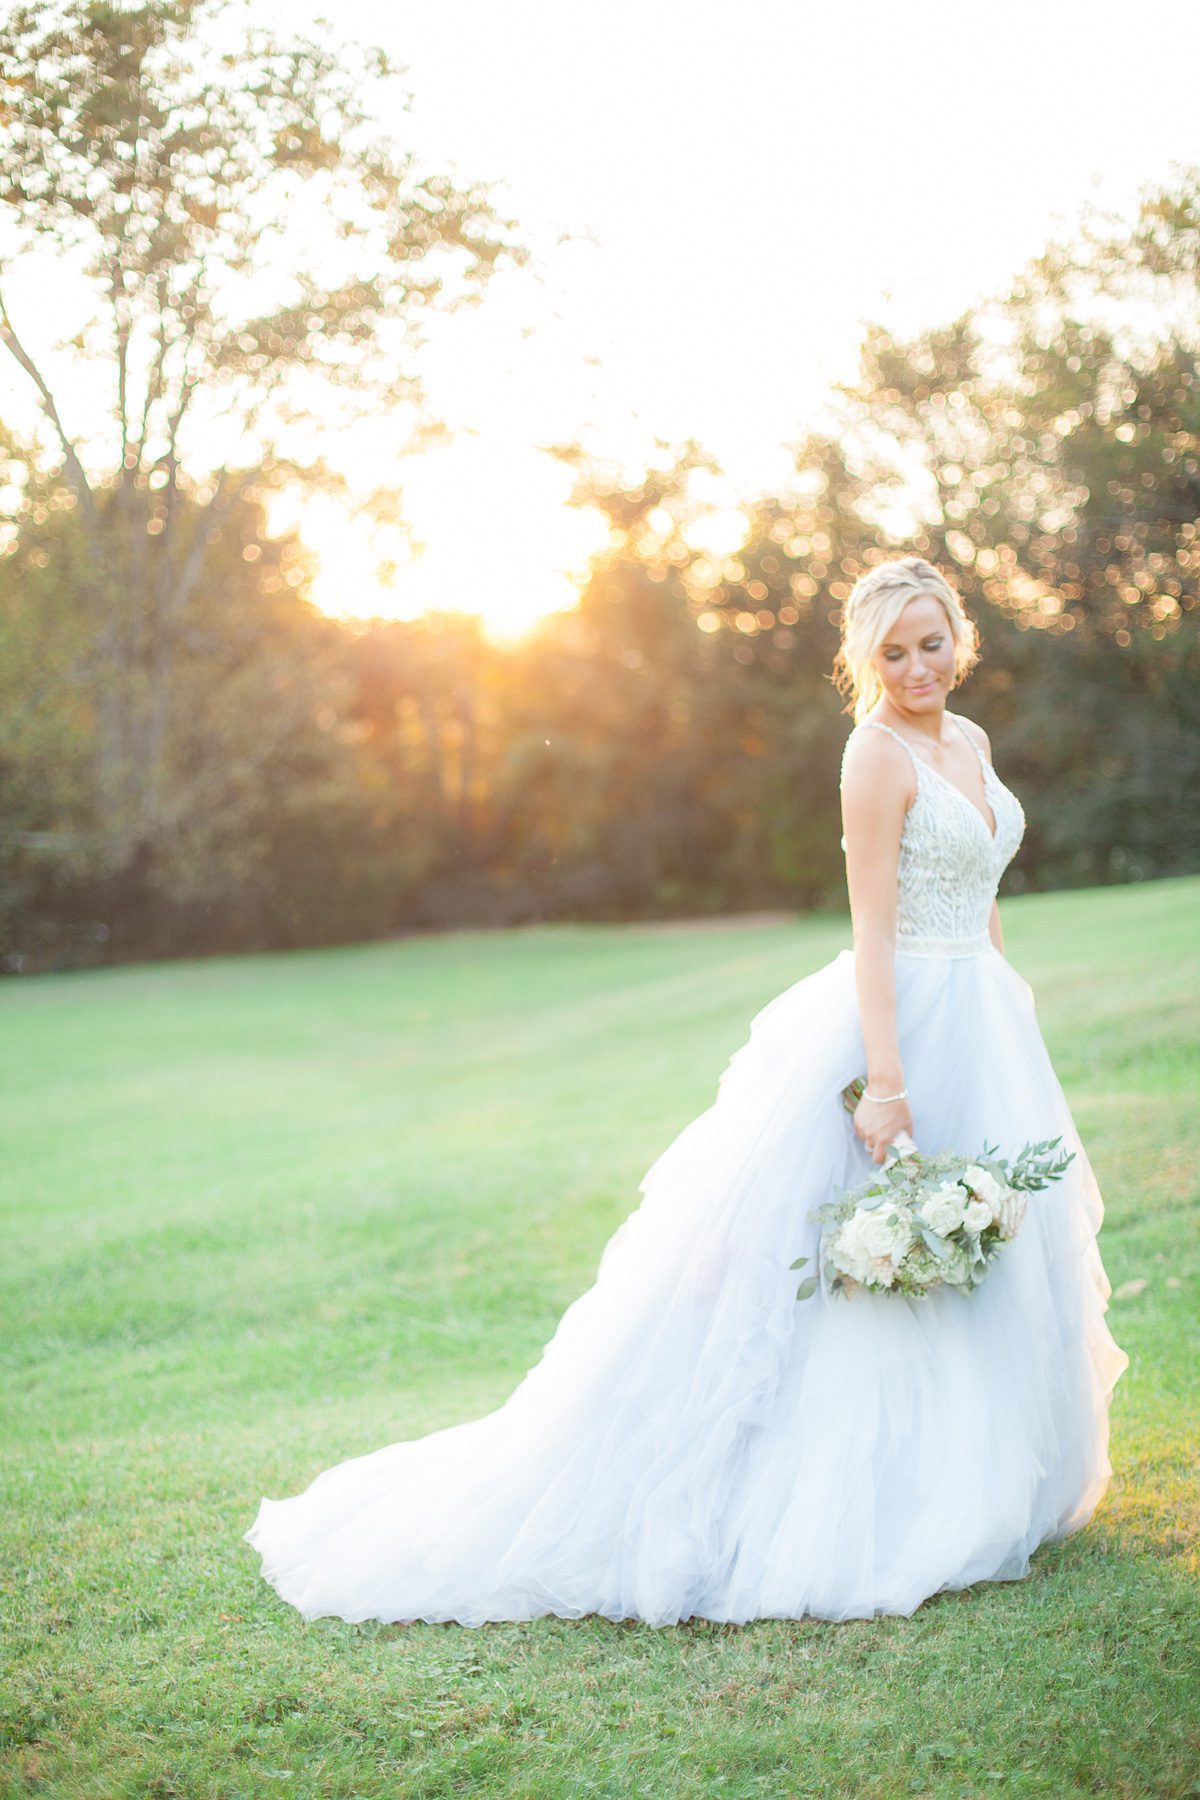 Photo of bride at sunset after wedding ceremony. Wedding photography at Cedarwood Weddings and Estate in Nashville, TN photography by Krista Lee Photography